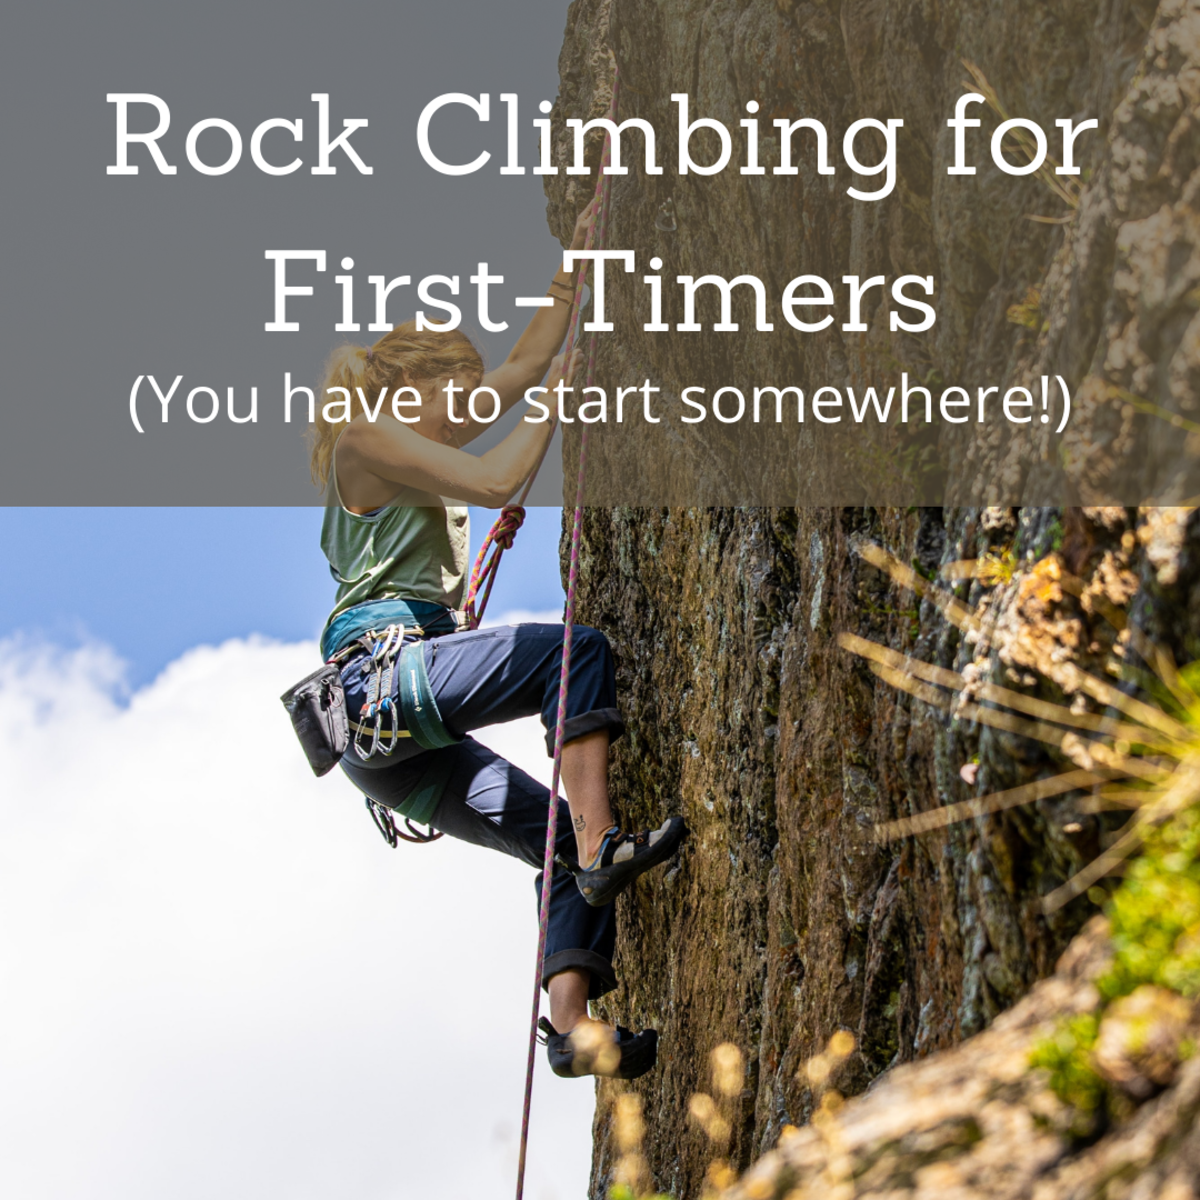 Dear Intimidated First-Time Rock Climbers: You’ve Got This